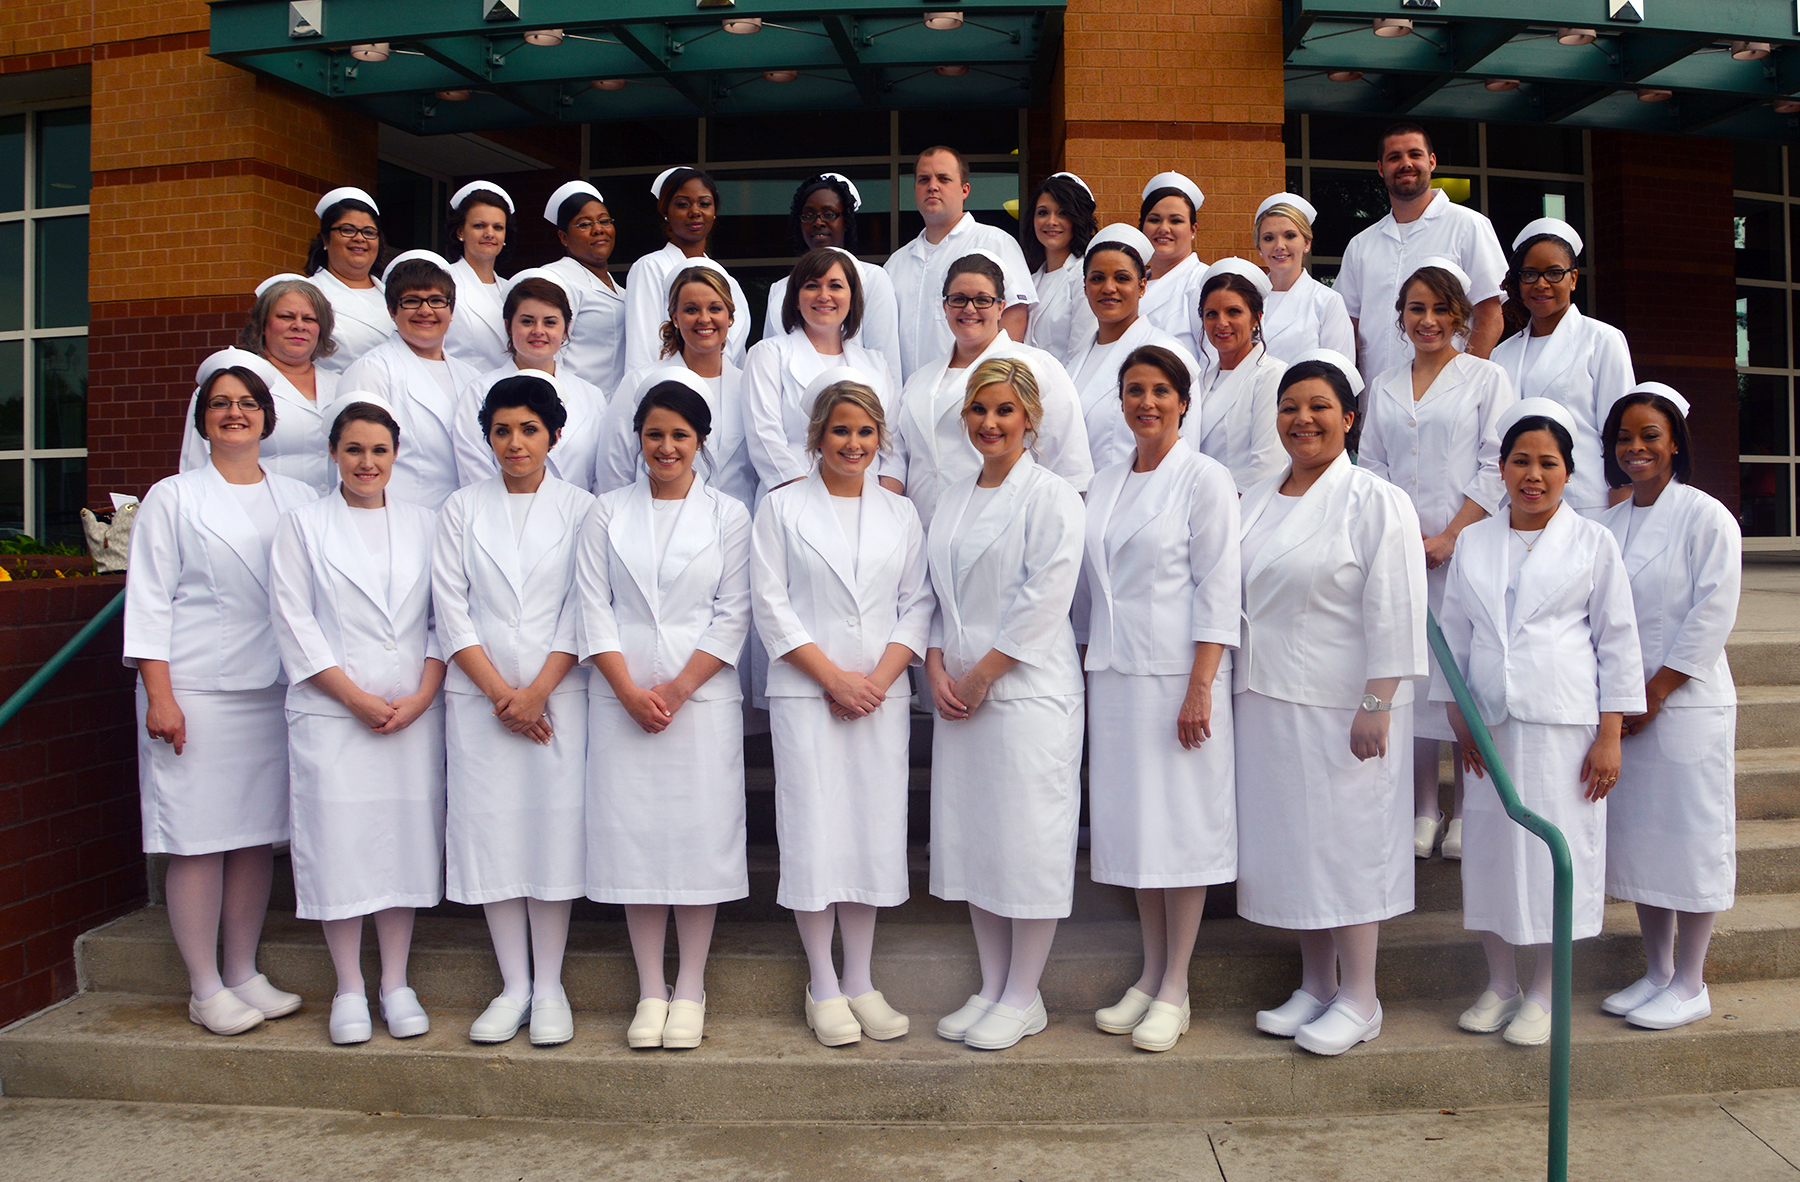 Pictured are the students who graduated from Richmond Community College’s Associate Degree of Nursing program. Front row, left to right, Katherine Shaw, Karen McIntyre, Erika Anderson, Adrianna Cooper, Carley McInnis, Christian Deane, Michelle Howe, Jessica Taylor, Levy Steele and Kaneisia Sansone; second row, left to right, Bobbi Richardson, Meghan Martin, Lauren Kelsey, Alexandra Aiken, Rebecca Wallace, Samantha Marsh, Rosanna Smith, Brandy Stutts, Jessie Molin and Jamika Hunter; third row, left to right, Brittney Wright, Amy Covington, Fakira Dowdy, Shakora Yarborough, Monica Gunter, Tyler Wood, Miranda Locklear, Brittany Hagins Strickland, Rebecca Brand, and Matthew Quick.